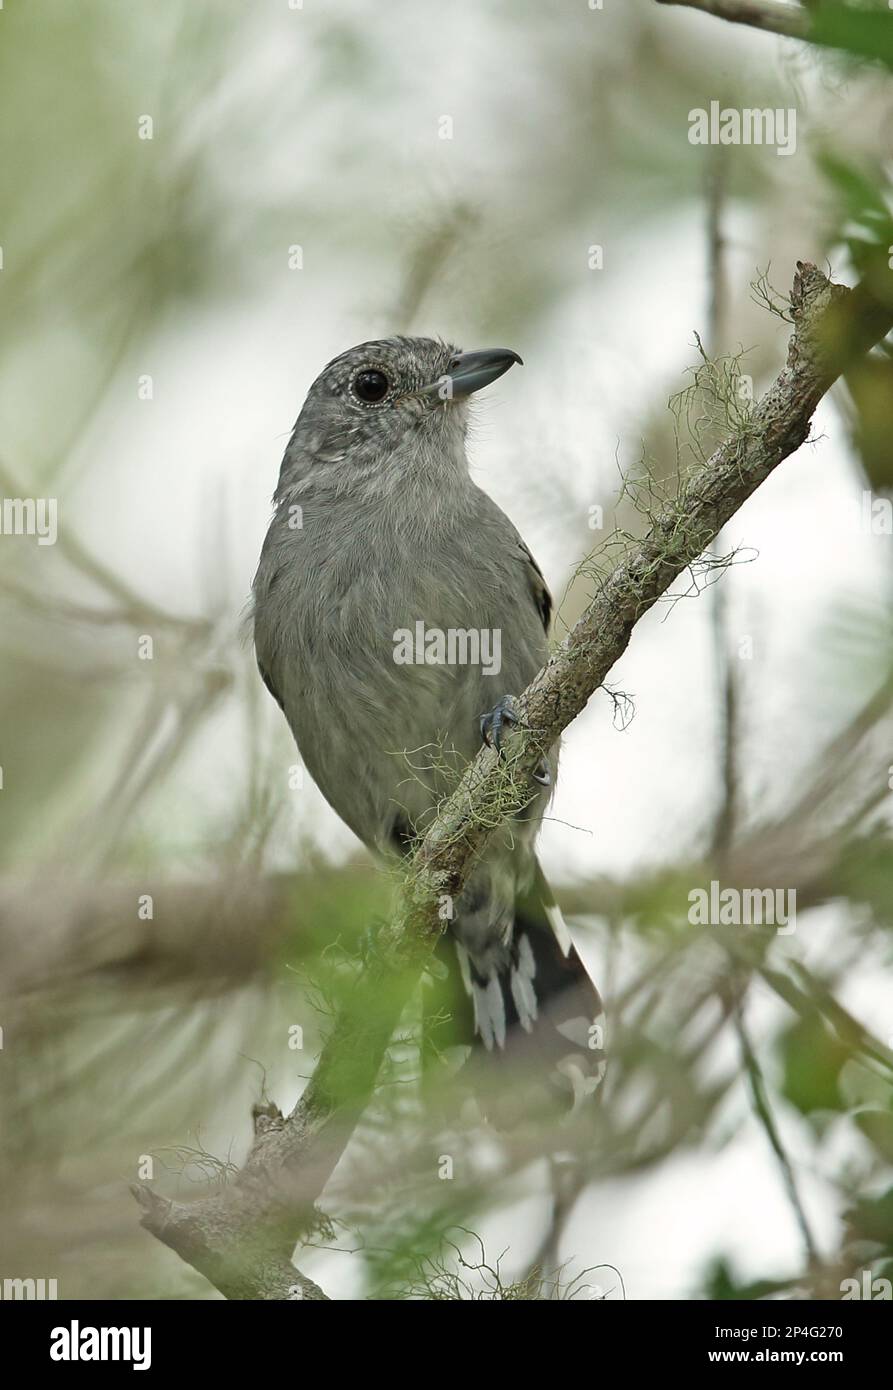 Sooretama Slaty Antshrike, Sooretama Slaty Antshrike, Animals, Birds, Sooretama Slaty Antshrike (Thamnophilus ambiguus) adult, perched on twig, Cabo Stock Photo